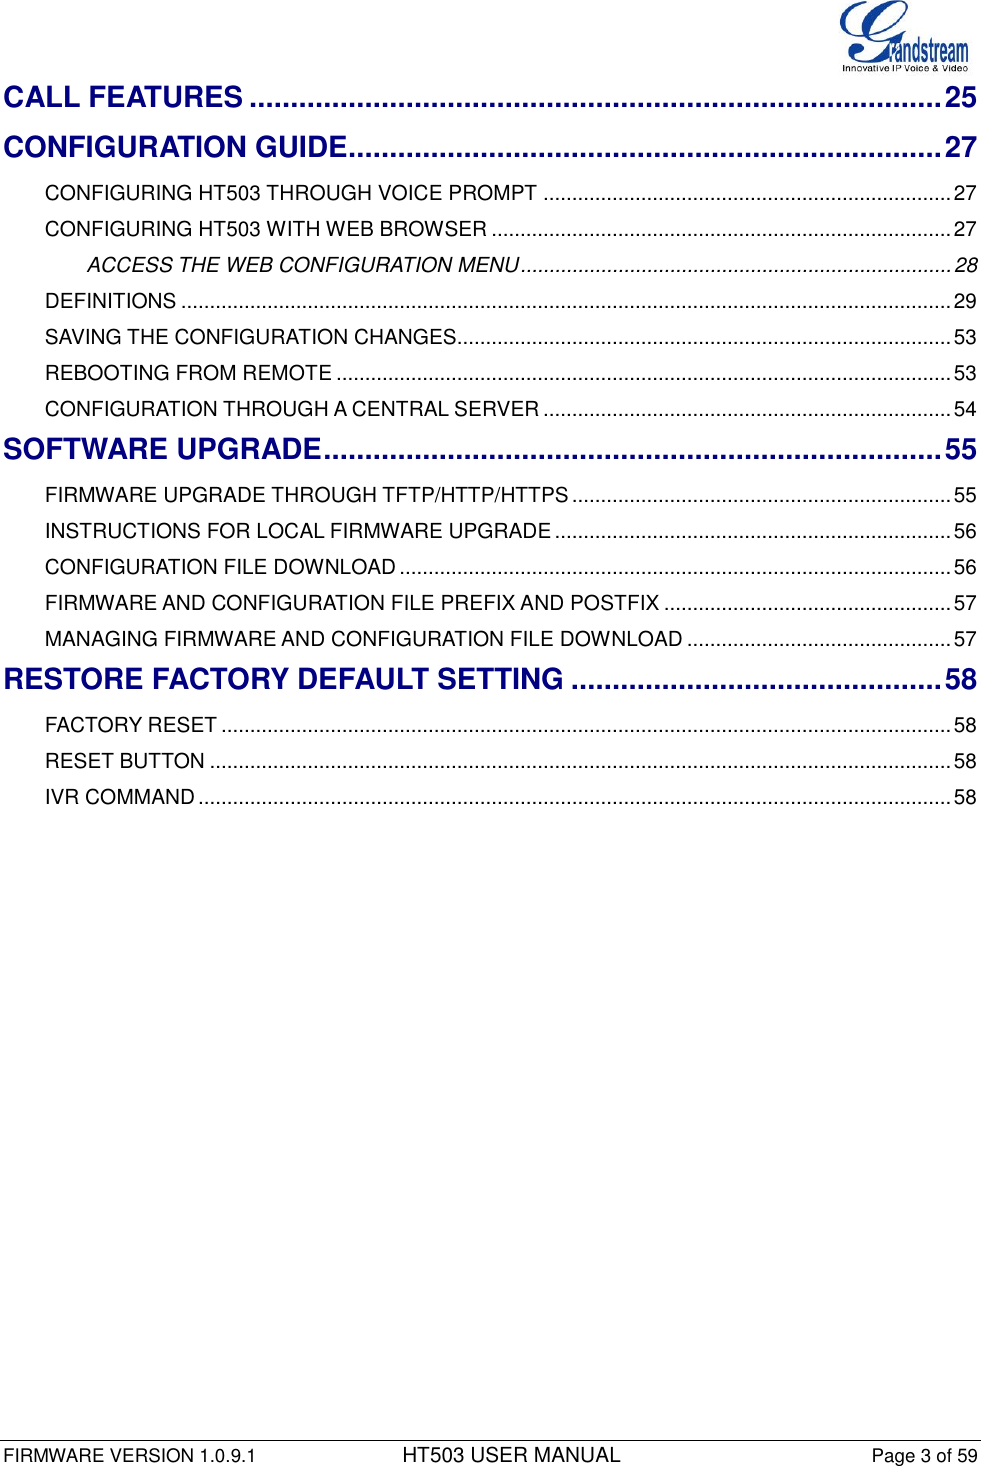  FIRMWARE VERSION 1.0.9.1          HT503 USER MANUAL Page 3 of 59       CALL FEATURES .................................................................................... 25 CONFIGURATION GUIDE ........................................................................ 27 CONFIGURING HT503 THROUGH VOICE PROMPT ....................................................................... 27 CONFIGURING HT503 WITH WEB BROWSER ................................................................................ 27 ACCESS THE WEB CONFIGURATION MENU ........................................................................... 28 DEFINITIONS ...................................................................................................................................... 29 SAVING THE CONFIGURATION CHANGES...................................................................................... 53 REBOOTING FROM REMOTE ........................................................................................................... 53 CONFIGURATION THROUGH A CENTRAL SERVER ....................................................................... 54 SOFTWARE UPGRADE ........................................................................... 55 FIRMWARE UPGRADE THROUGH TFTP/HTTP/HTTPS .................................................................. 55 INSTRUCTIONS FOR LOCAL FIRMWARE UPGRADE ..................................................................... 56 CONFIGURATION FILE DOWNLOAD ................................................................................................ 56 FIRMWARE AND CONFIGURATION FILE PREFIX AND POSTFIX .................................................. 57 MANAGING FIRMWARE AND CONFIGURATION FILE DOWNLOAD .............................................. 57 RESTORE FACTORY DEFAULT SETTING ............................................. 58 FACTORY RESET ............................................................................................................................... 58 RESET BUTTON ................................................................................................................................. 58 IVR COMMAND ................................................................................................................................... 58  